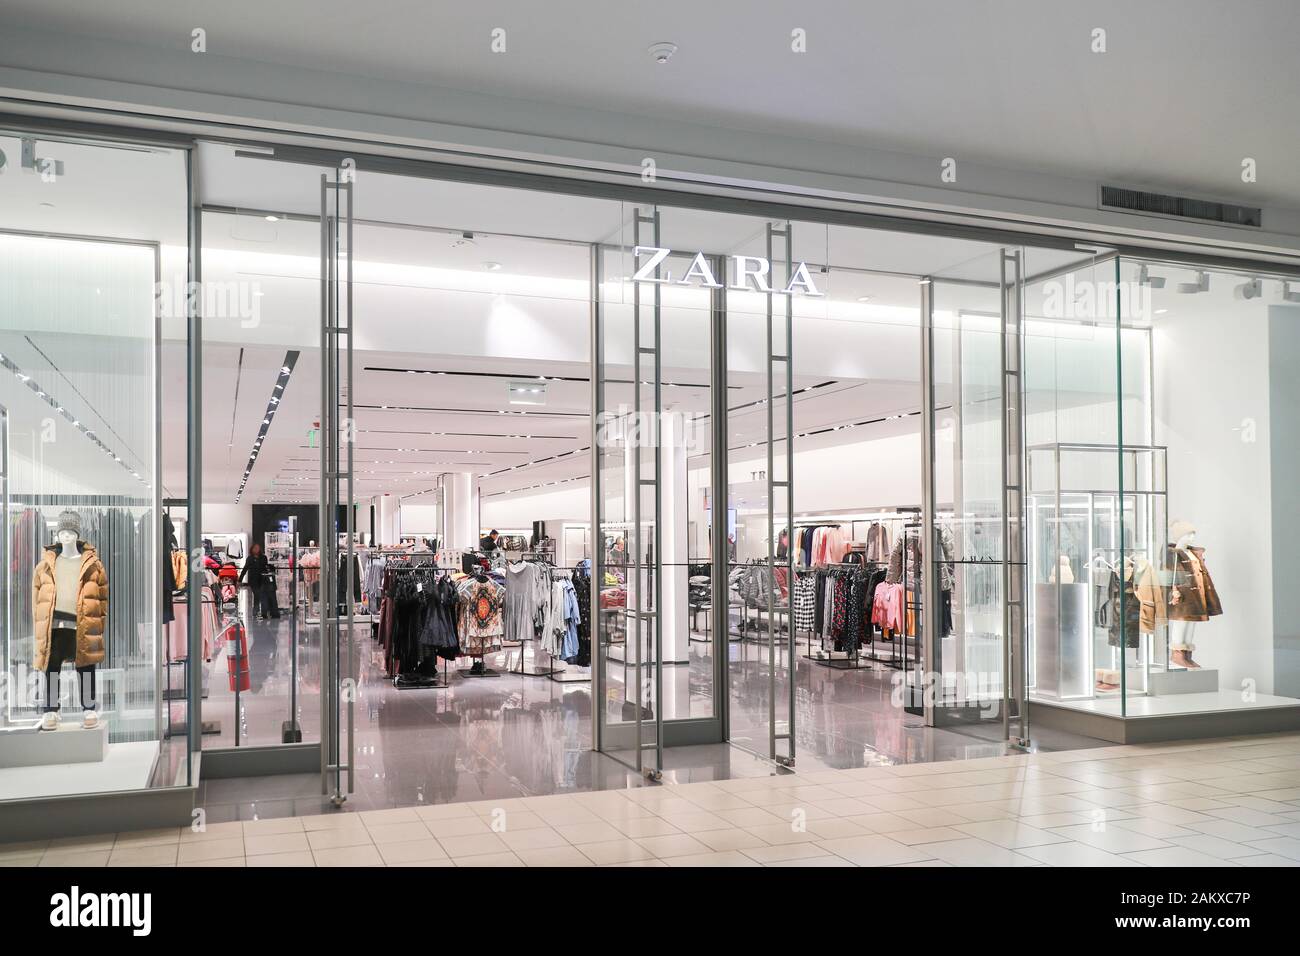 Princeton New Jersey December 22 2019: Zara fashion store in shopping  center. Brand logo and view inside the store. - Image Stock Photo - Alamy